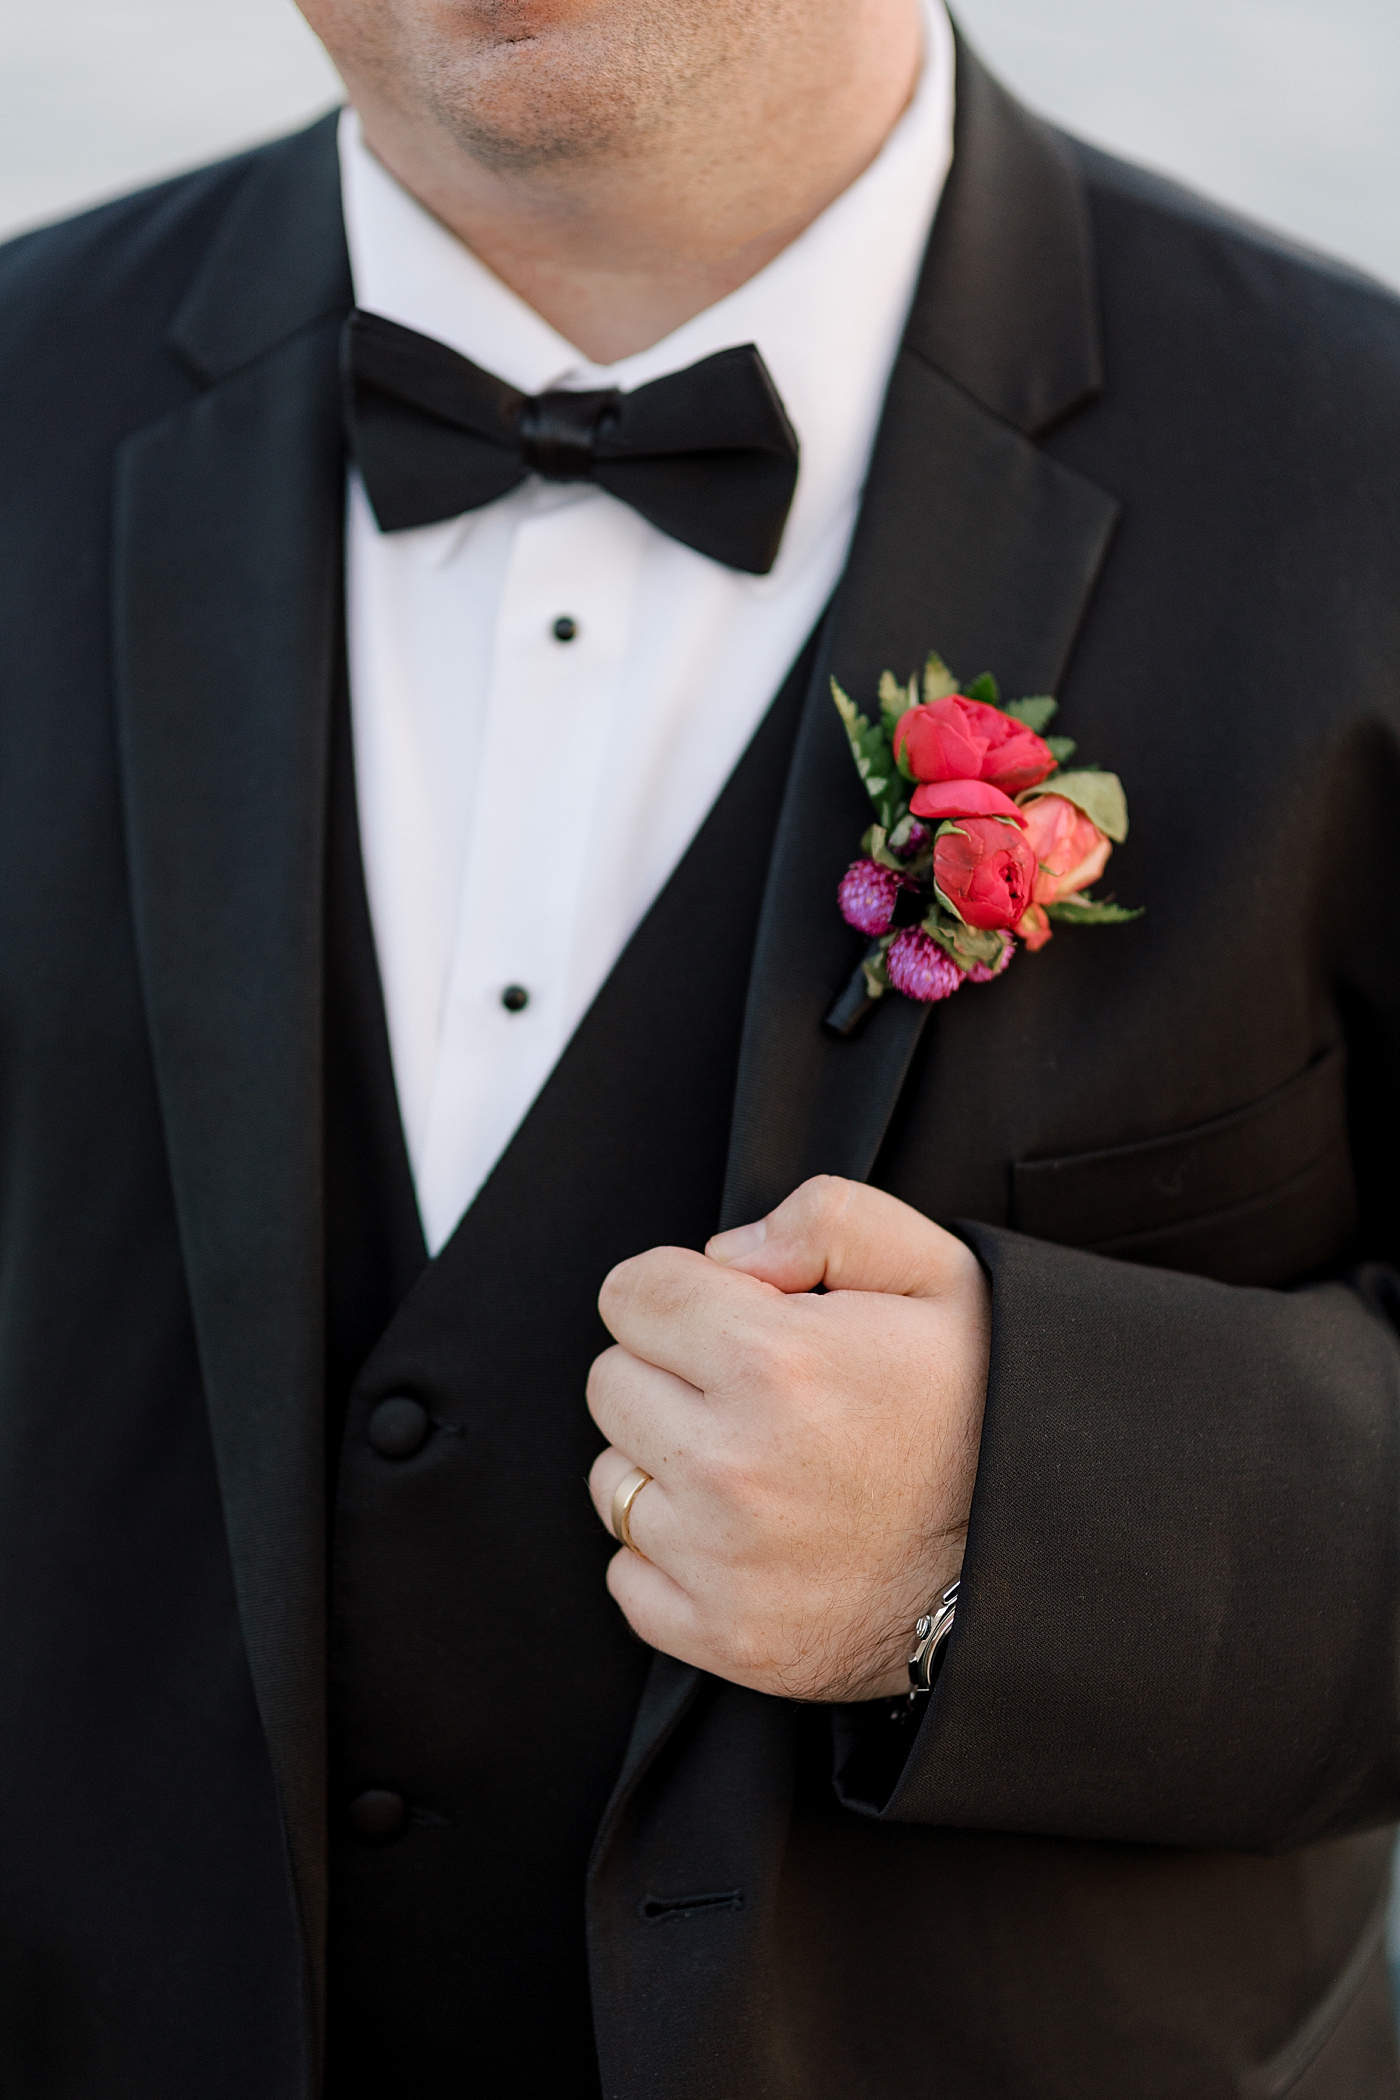 Boutonniere details at sunset | Image by Hope Helmuth Photography